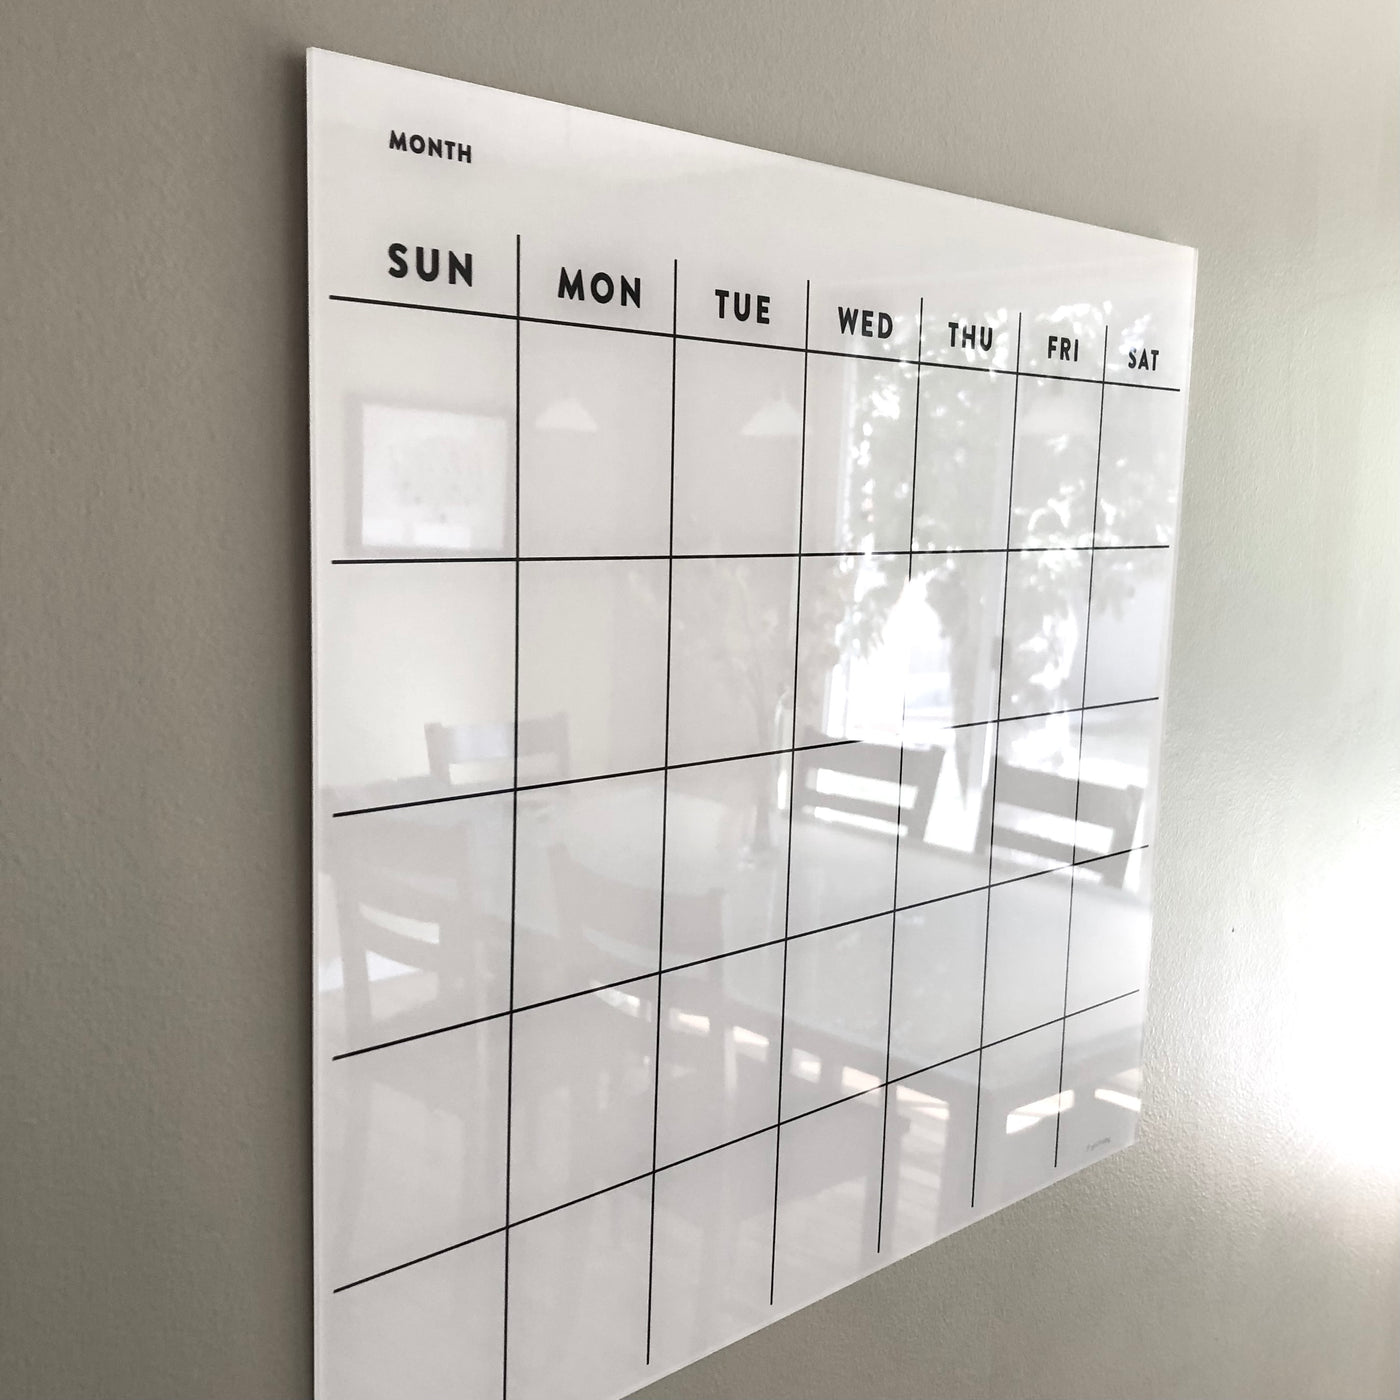 Dry erase wall calendar - perfect for non-magnetic fridge or dorm room wall